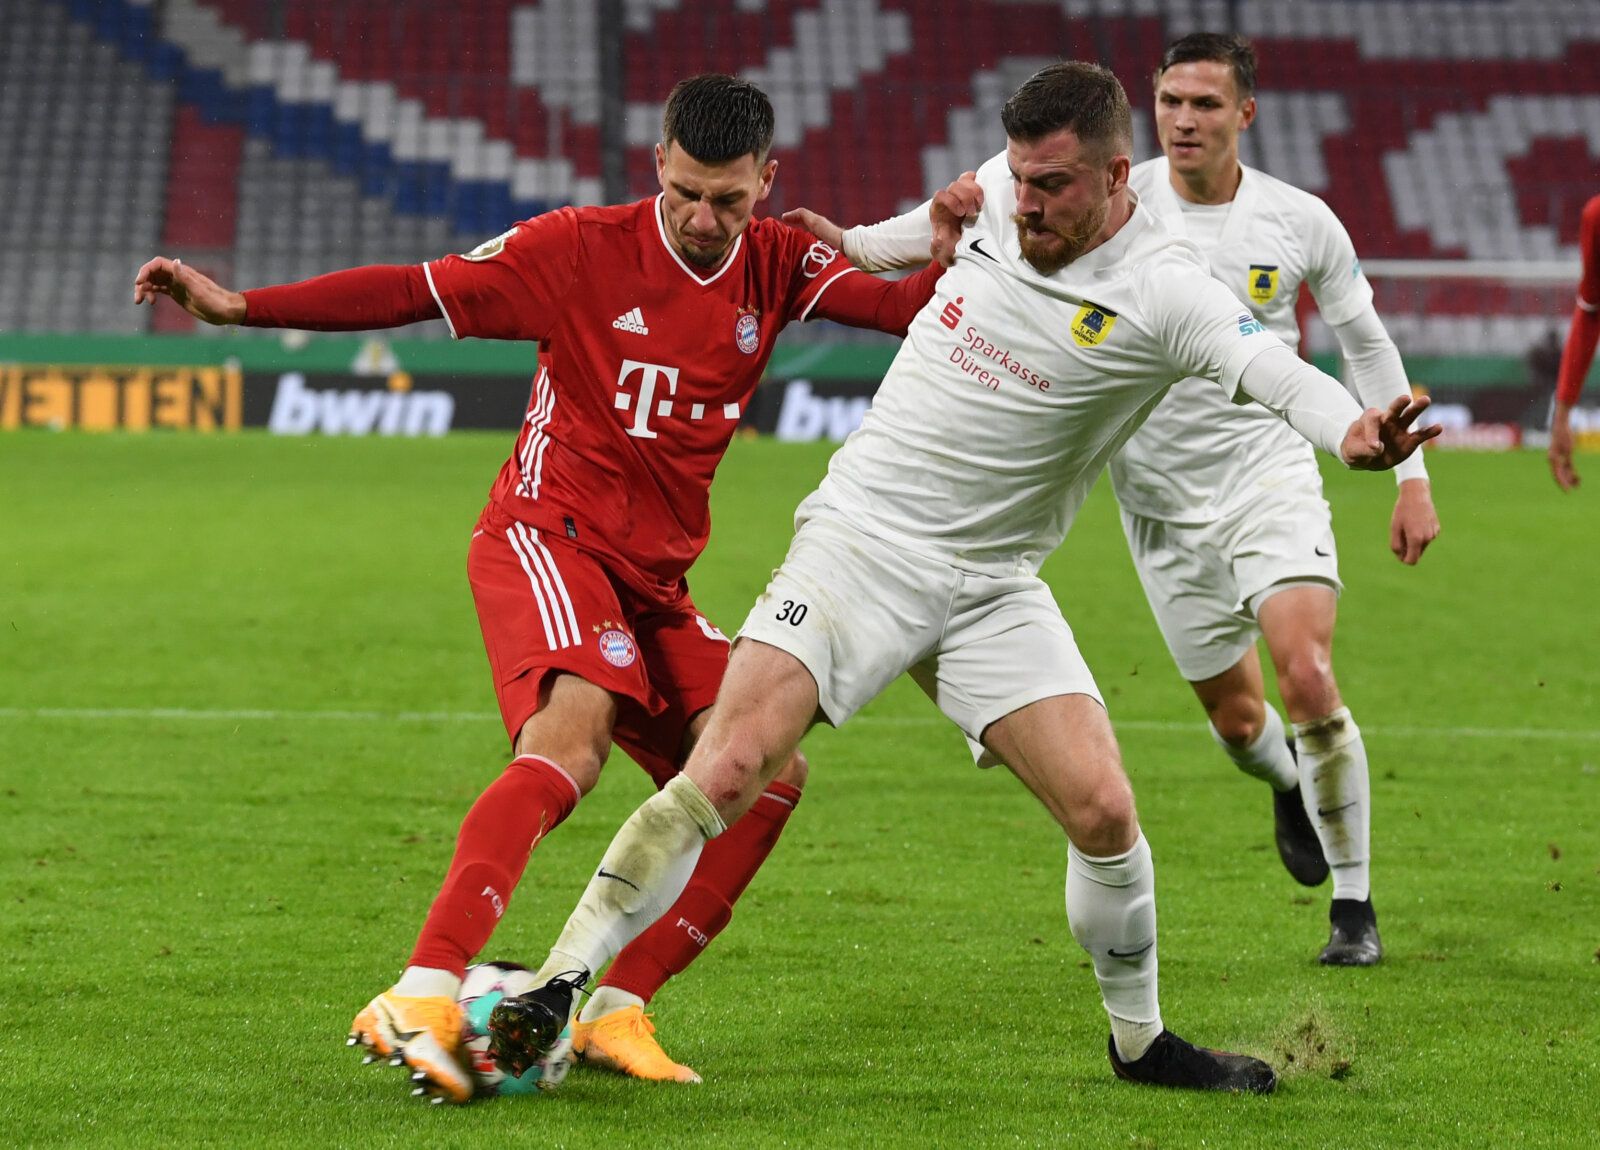 Soccer Football - DFB Cup - FC Duren v Bayern Munich - Allianz Arena, Munich, Germany - October 15, 2020  Bayern Munich's Leon Dajaku in action with FC Duren's Markus Wipperfurth  REUTERS / Andreas Gebert  DFB regulations prohibit any use of photographs as image sequences and/or quasi-video